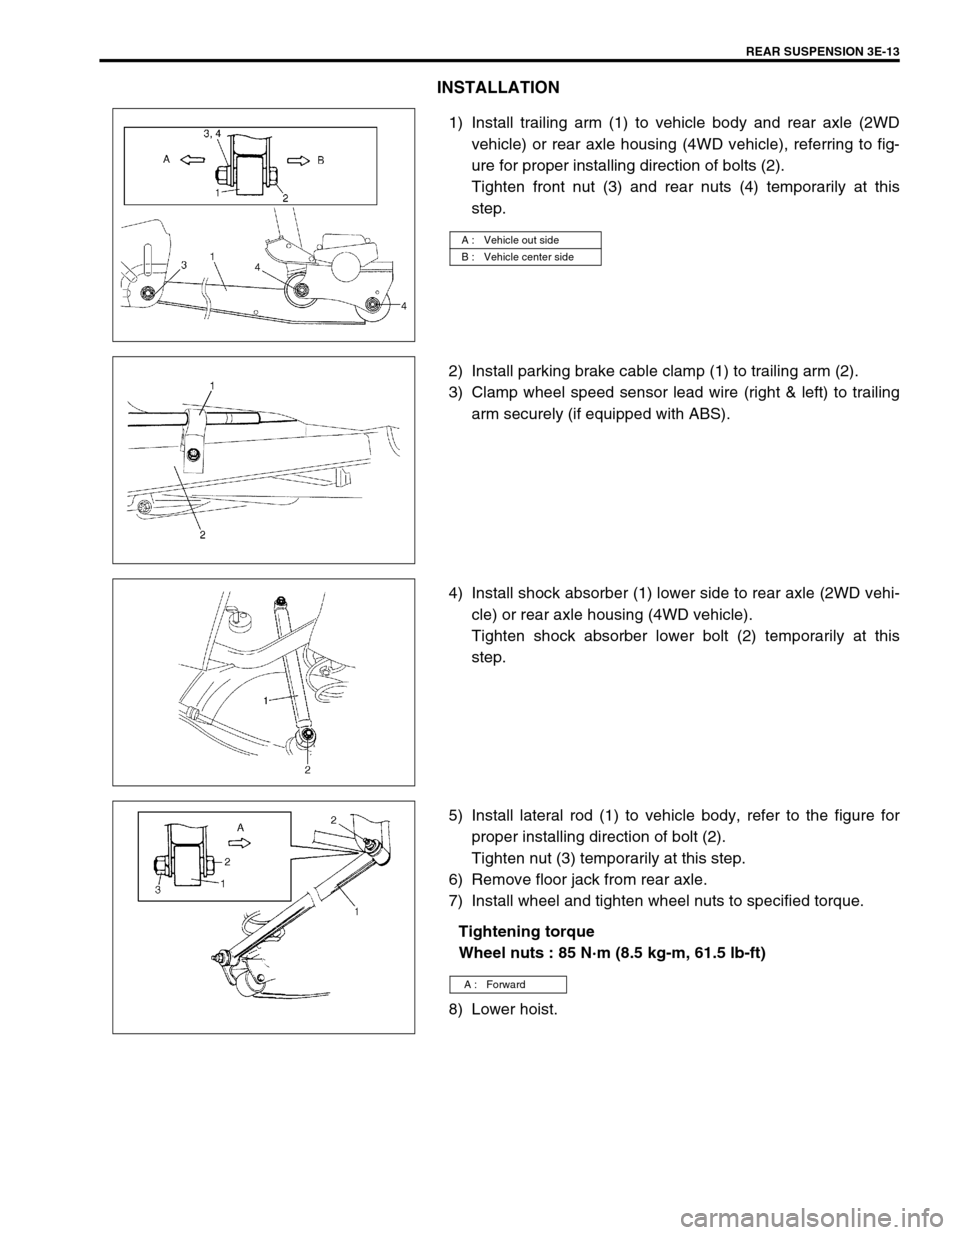 SUZUKI SWIFT 2000 1.G RG413 Service User Guide REAR SUSPENSION 3E-13
INSTALLATION
1) Install trailing arm (1) to vehicle body and rear axle (2WD
vehicle) or rear axle housing (4WD vehicle), referring to fig-
ure for proper installing direction of 